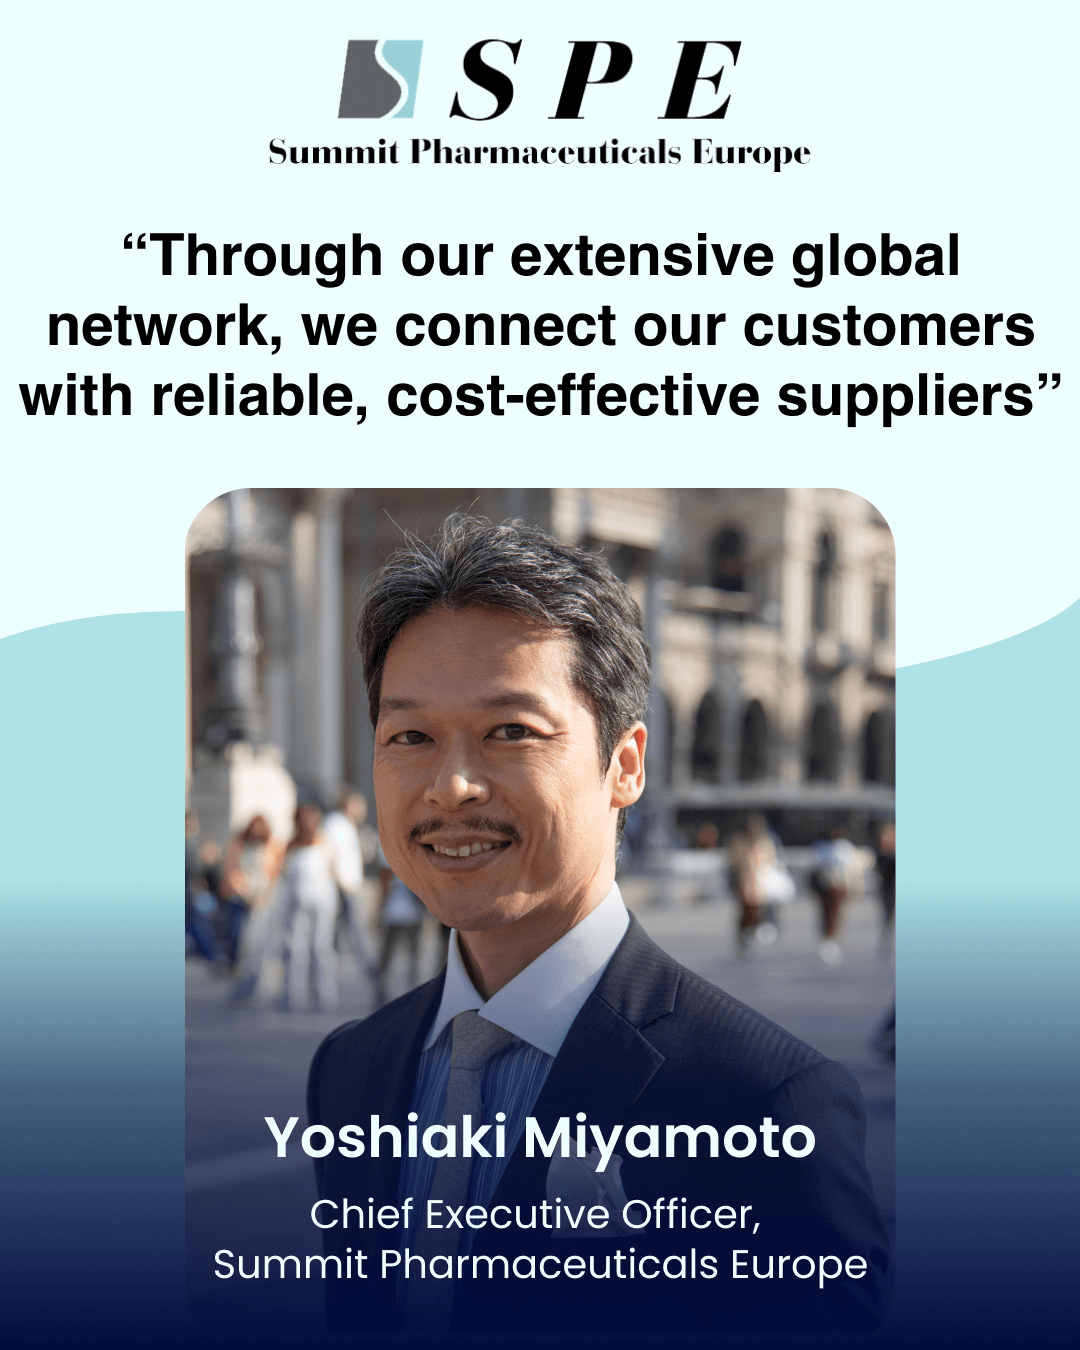 “Through our extensive global network, we connect our customers with reliable, cost-effective suppliers”